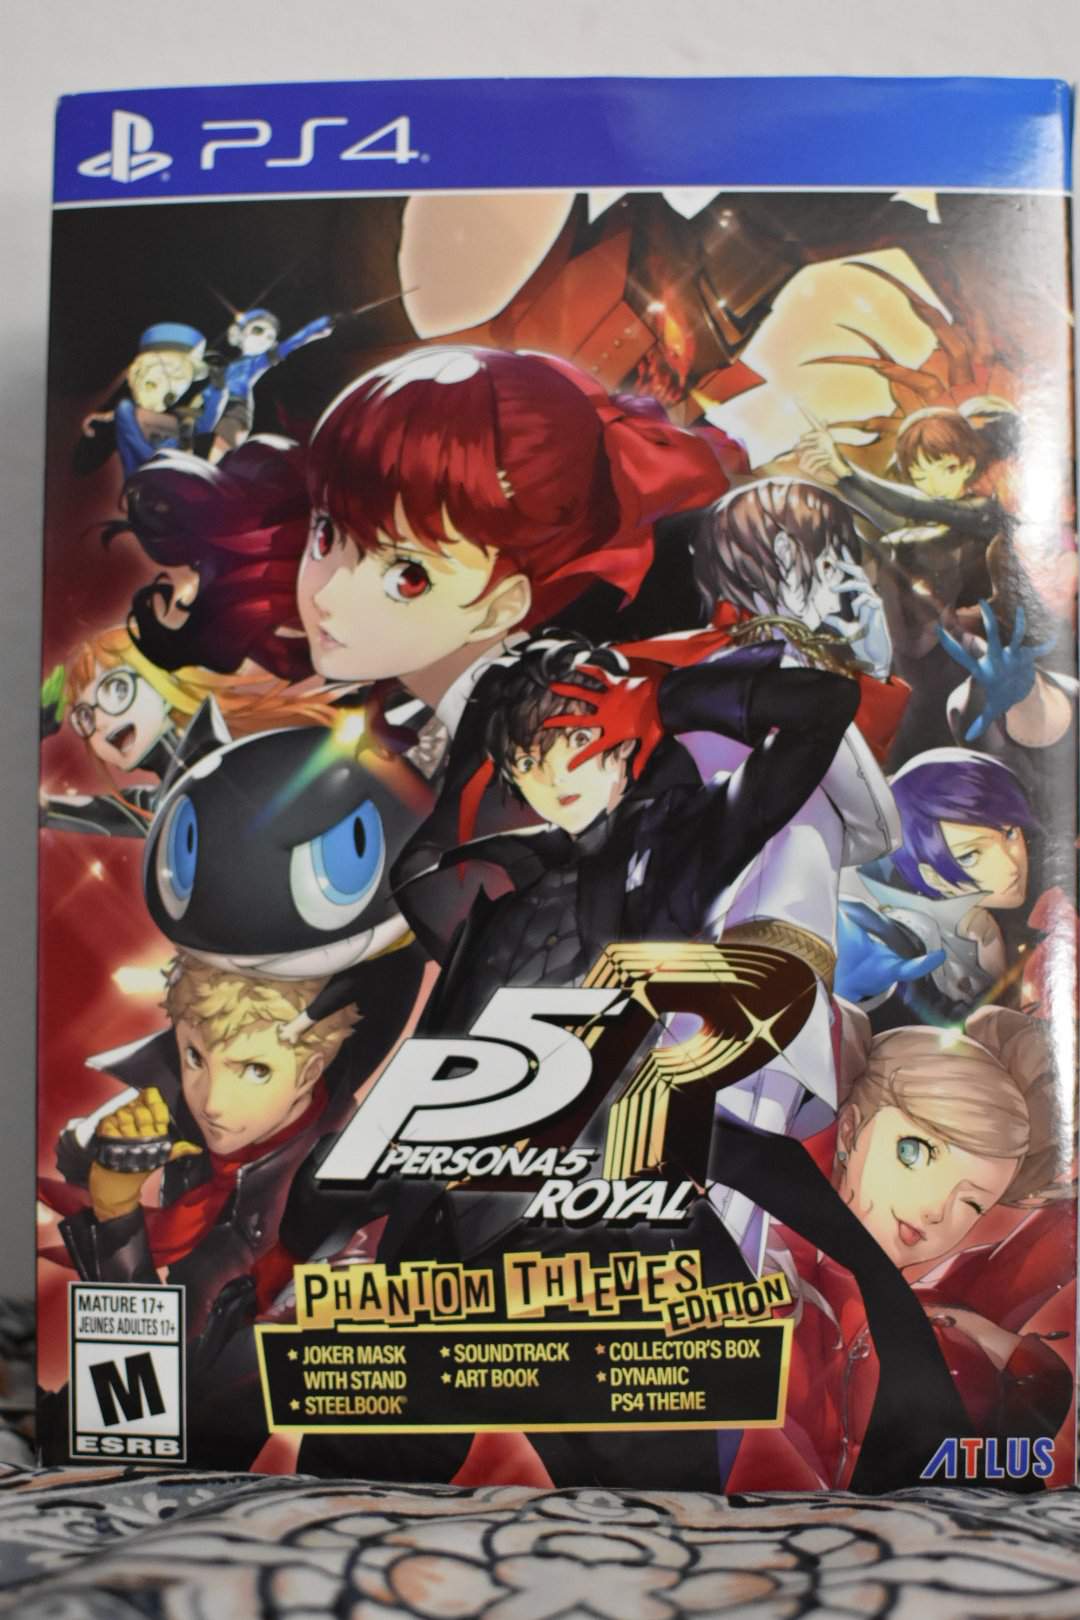 Productie bungeejumpen appel Persona 5 Royal: Phantom Thieves Edition | Video Games Amino